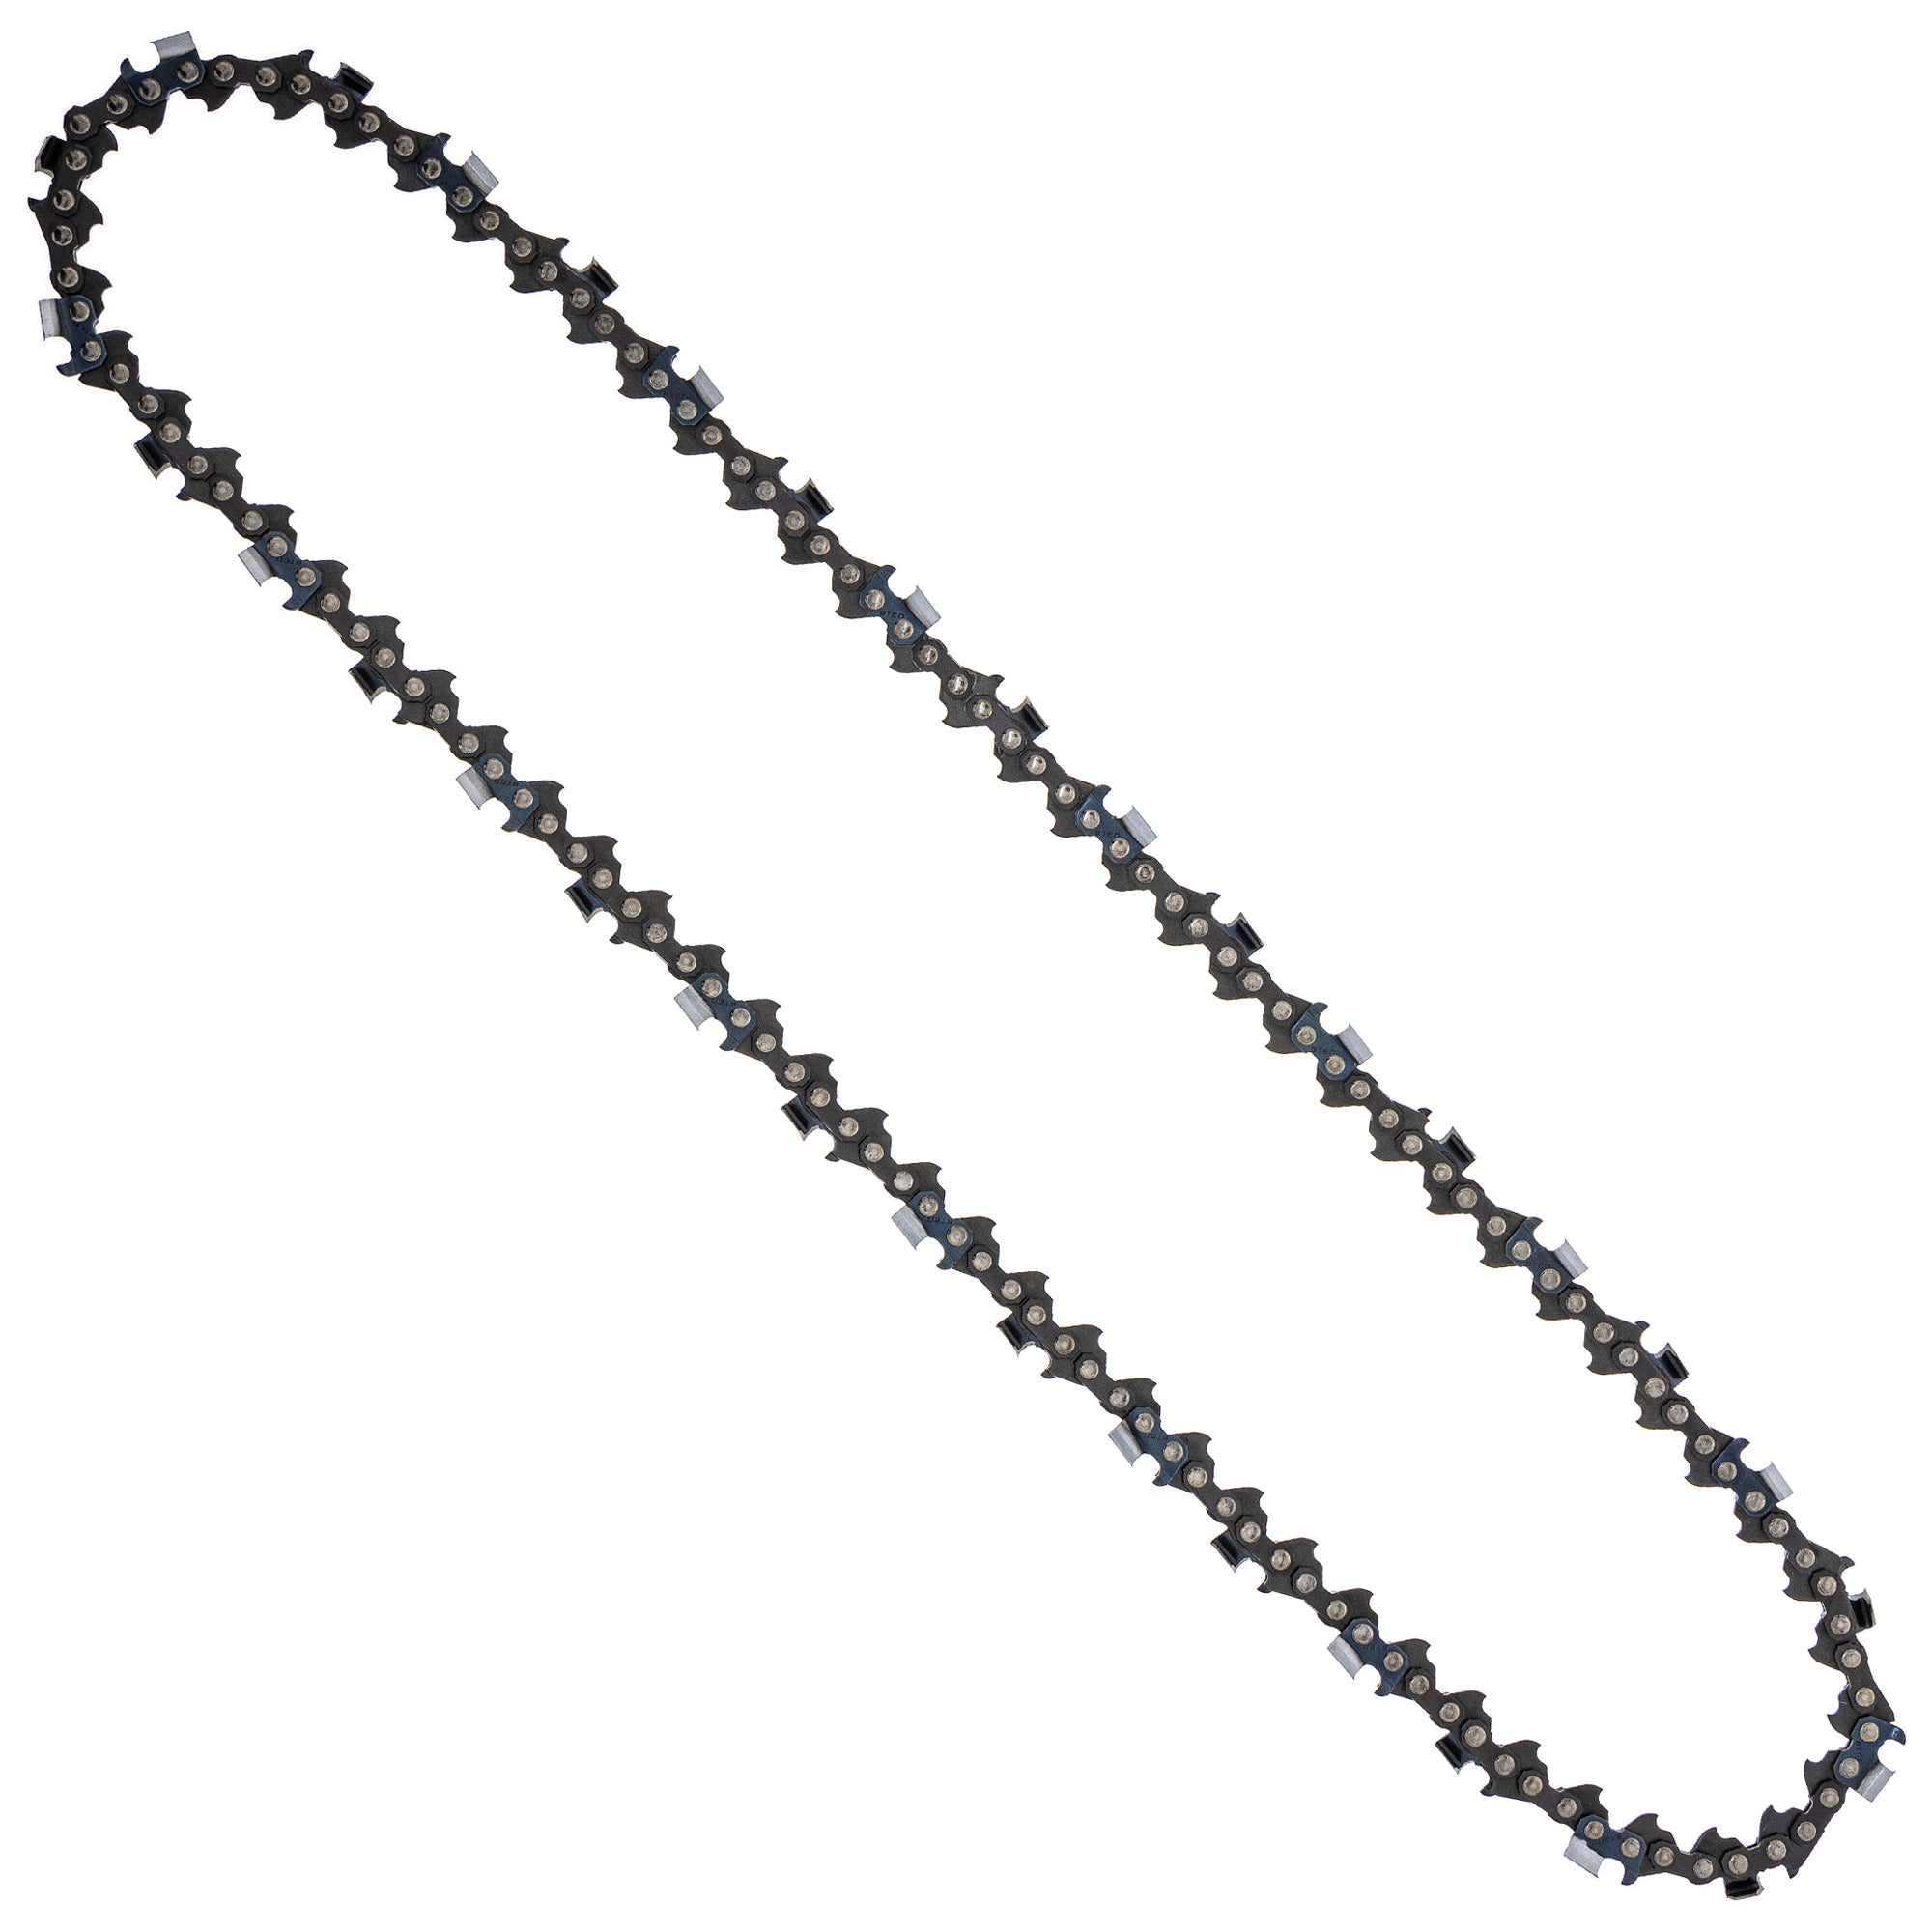 8TEN 810-CCC2218H Chain 2-Pack for zOTHER Oregon Husqvarna Poulan